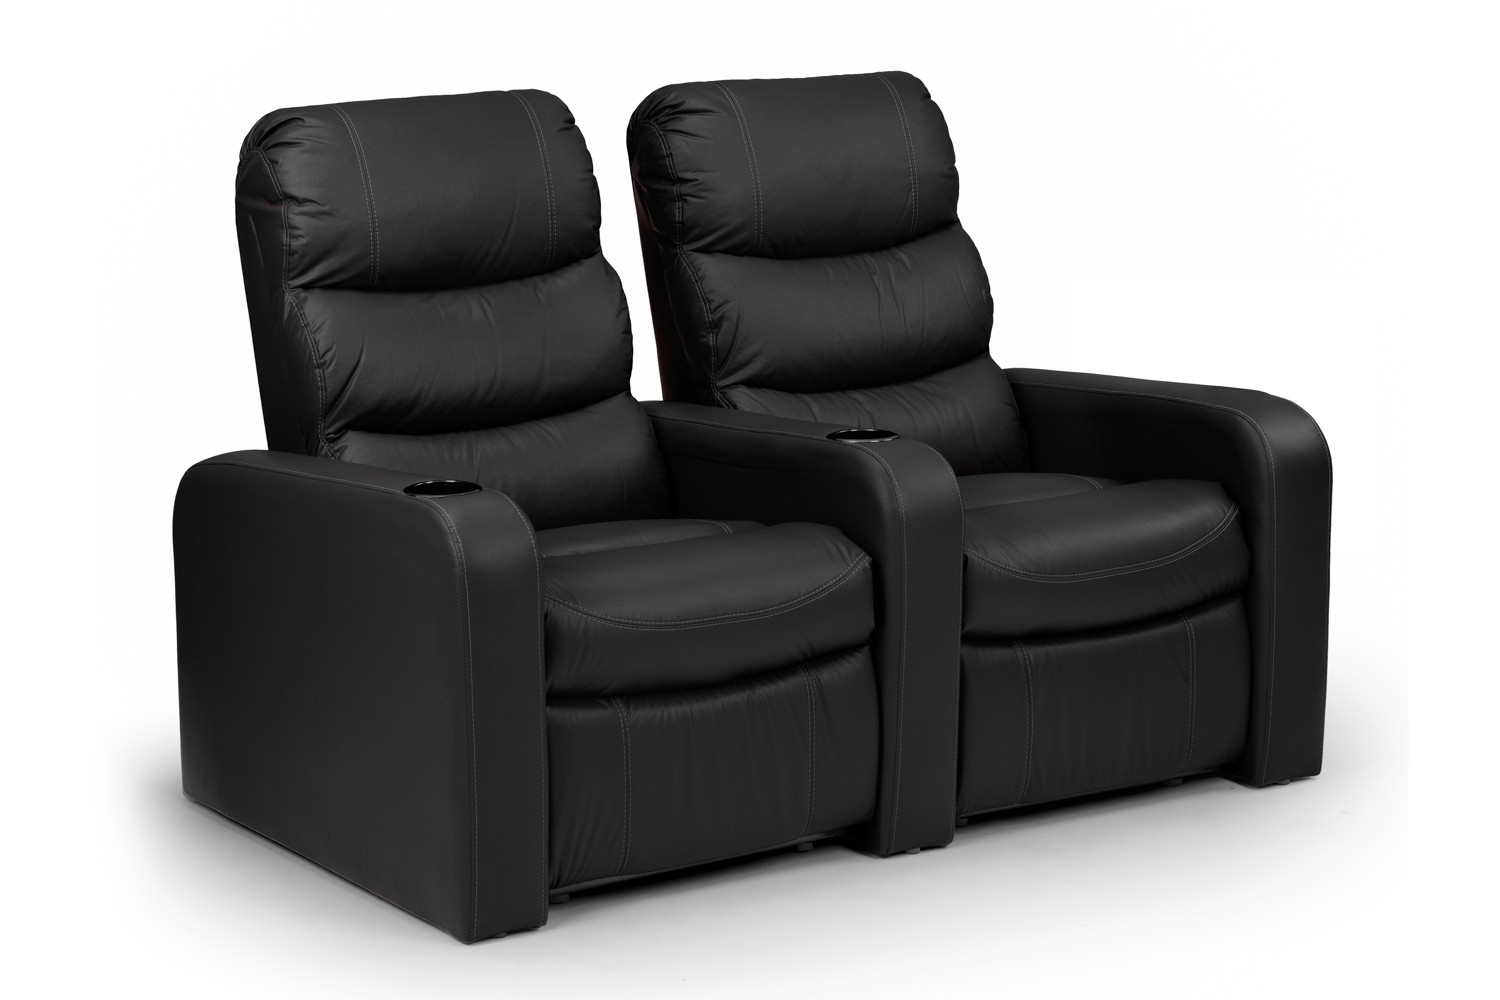 Cinema Pro 2 Seater Recliner - Black Recliner Couches - 5